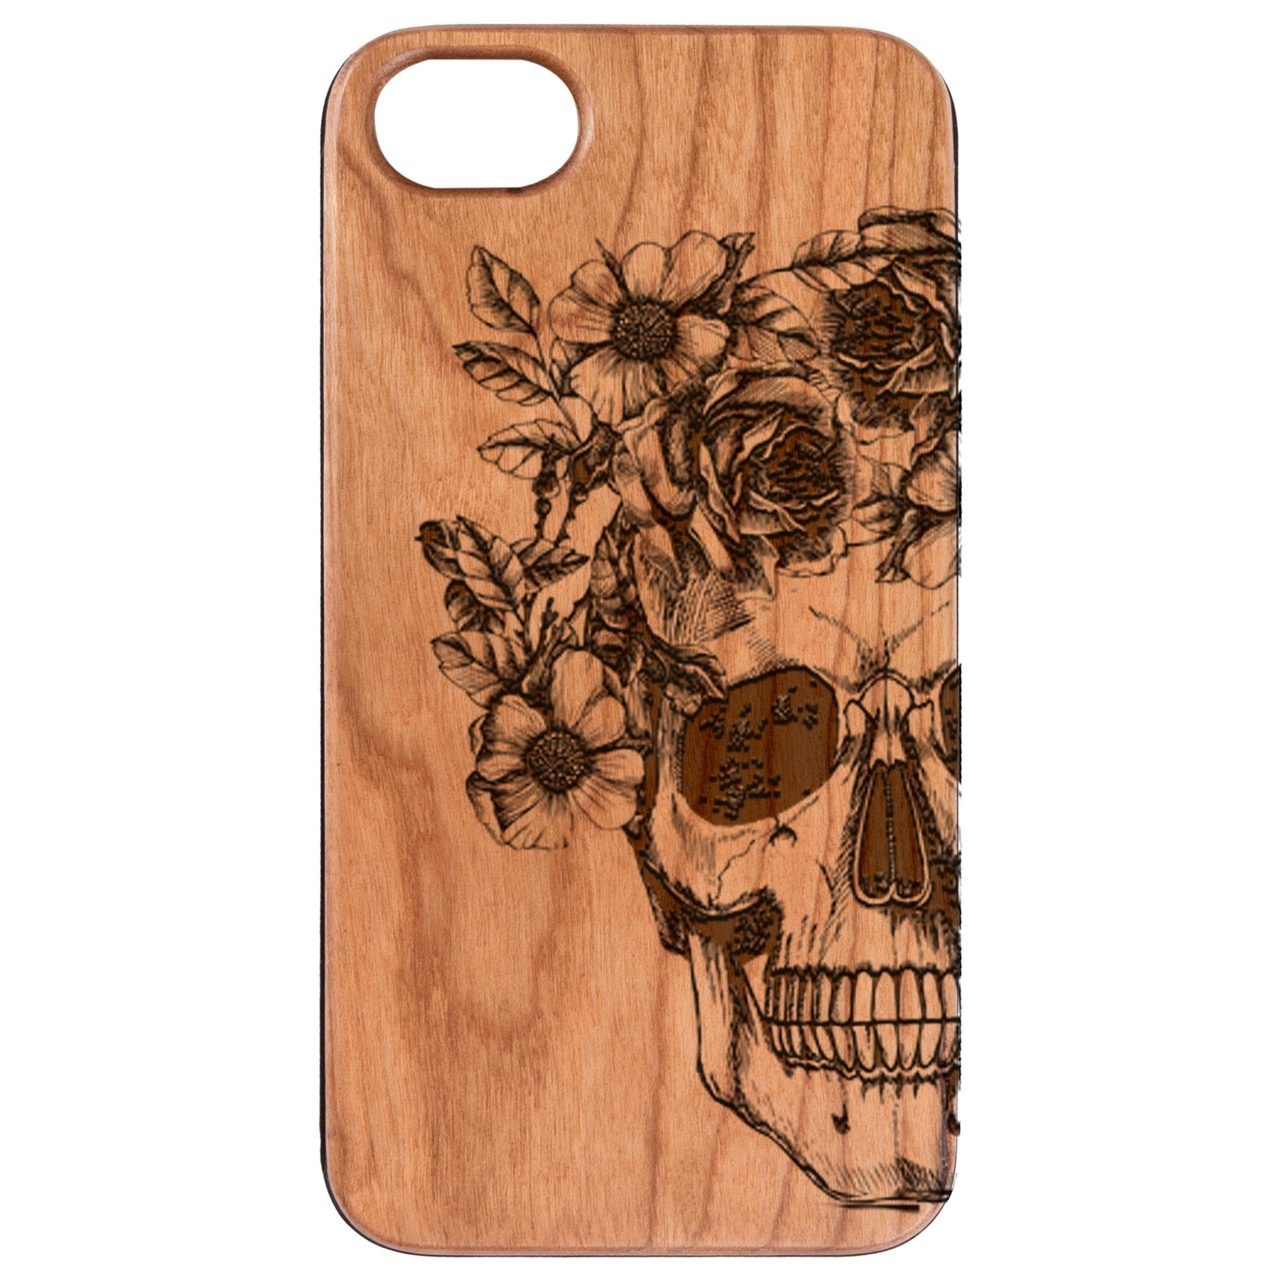  Skull with Flowers - Engraved - Wooden Phone Case - IPhone 13 Models